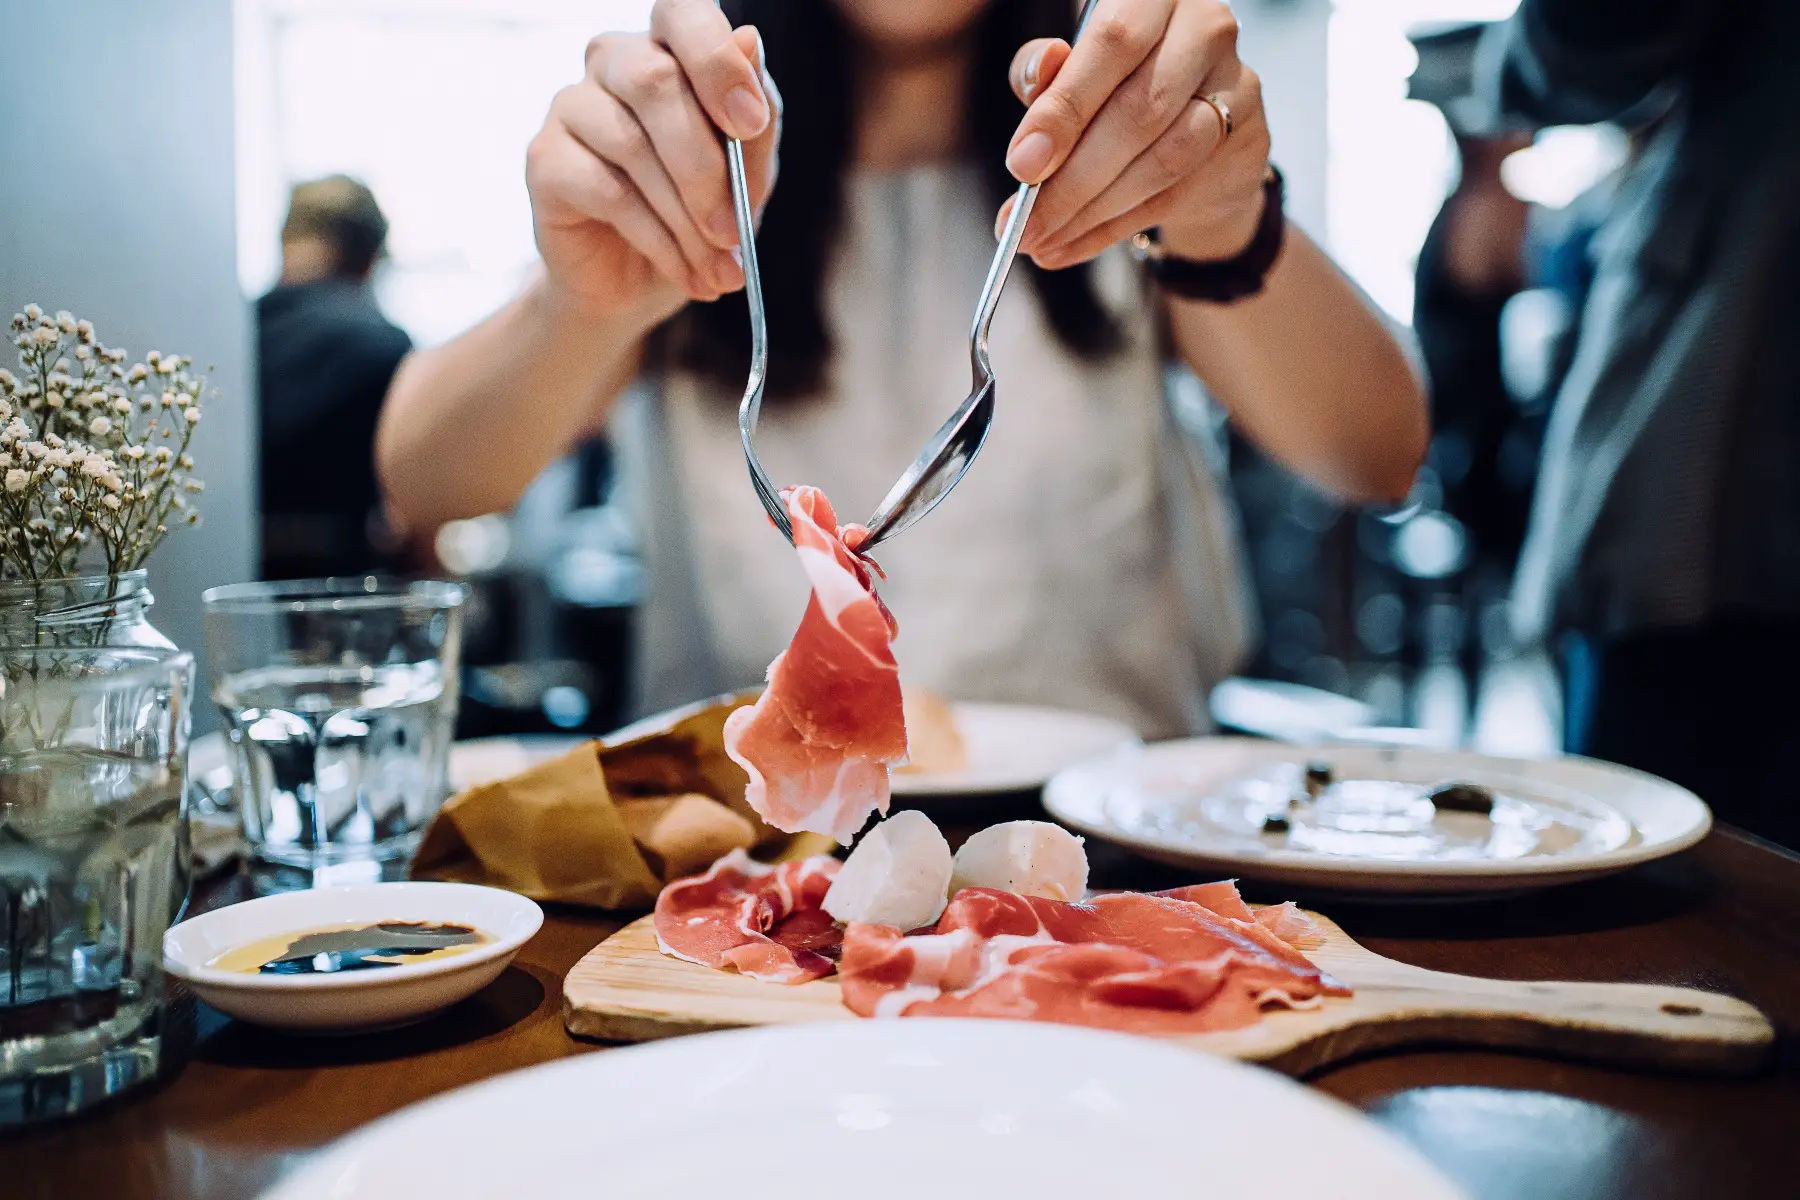 A close up and midsection of woman taking a piece of prosciutto off a plate of antipasti